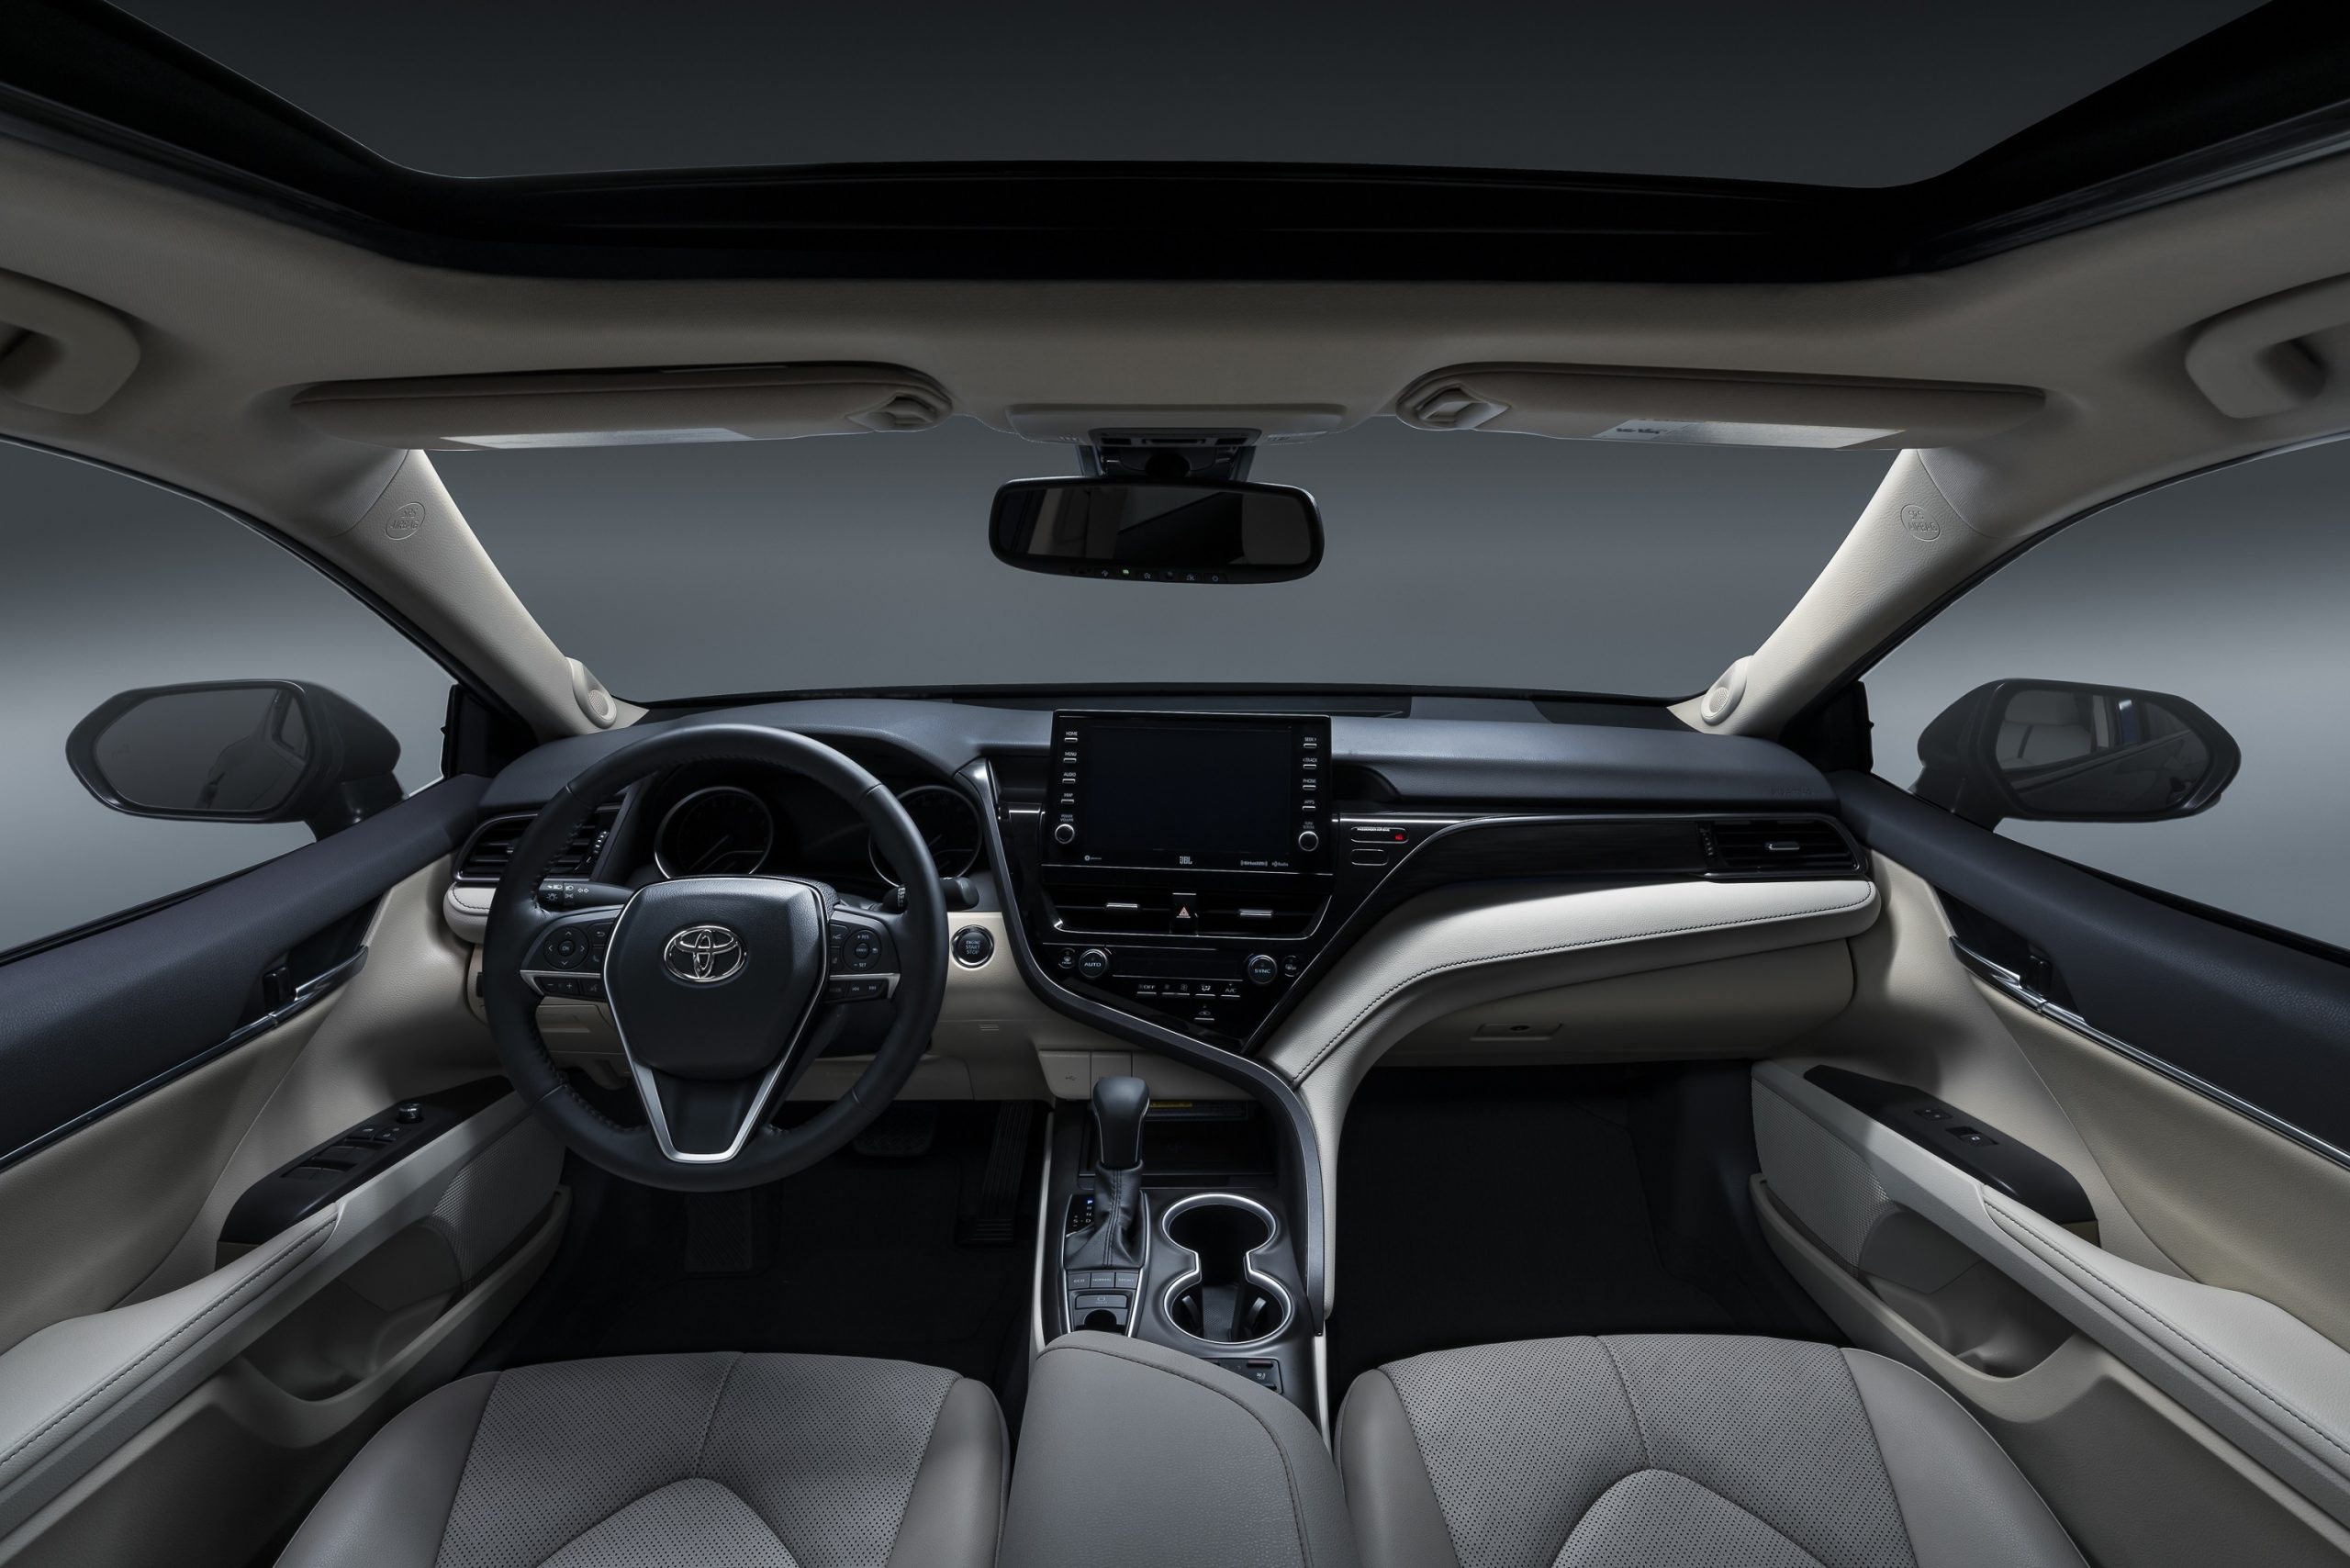 The interior of the new Toyota Camry in beige